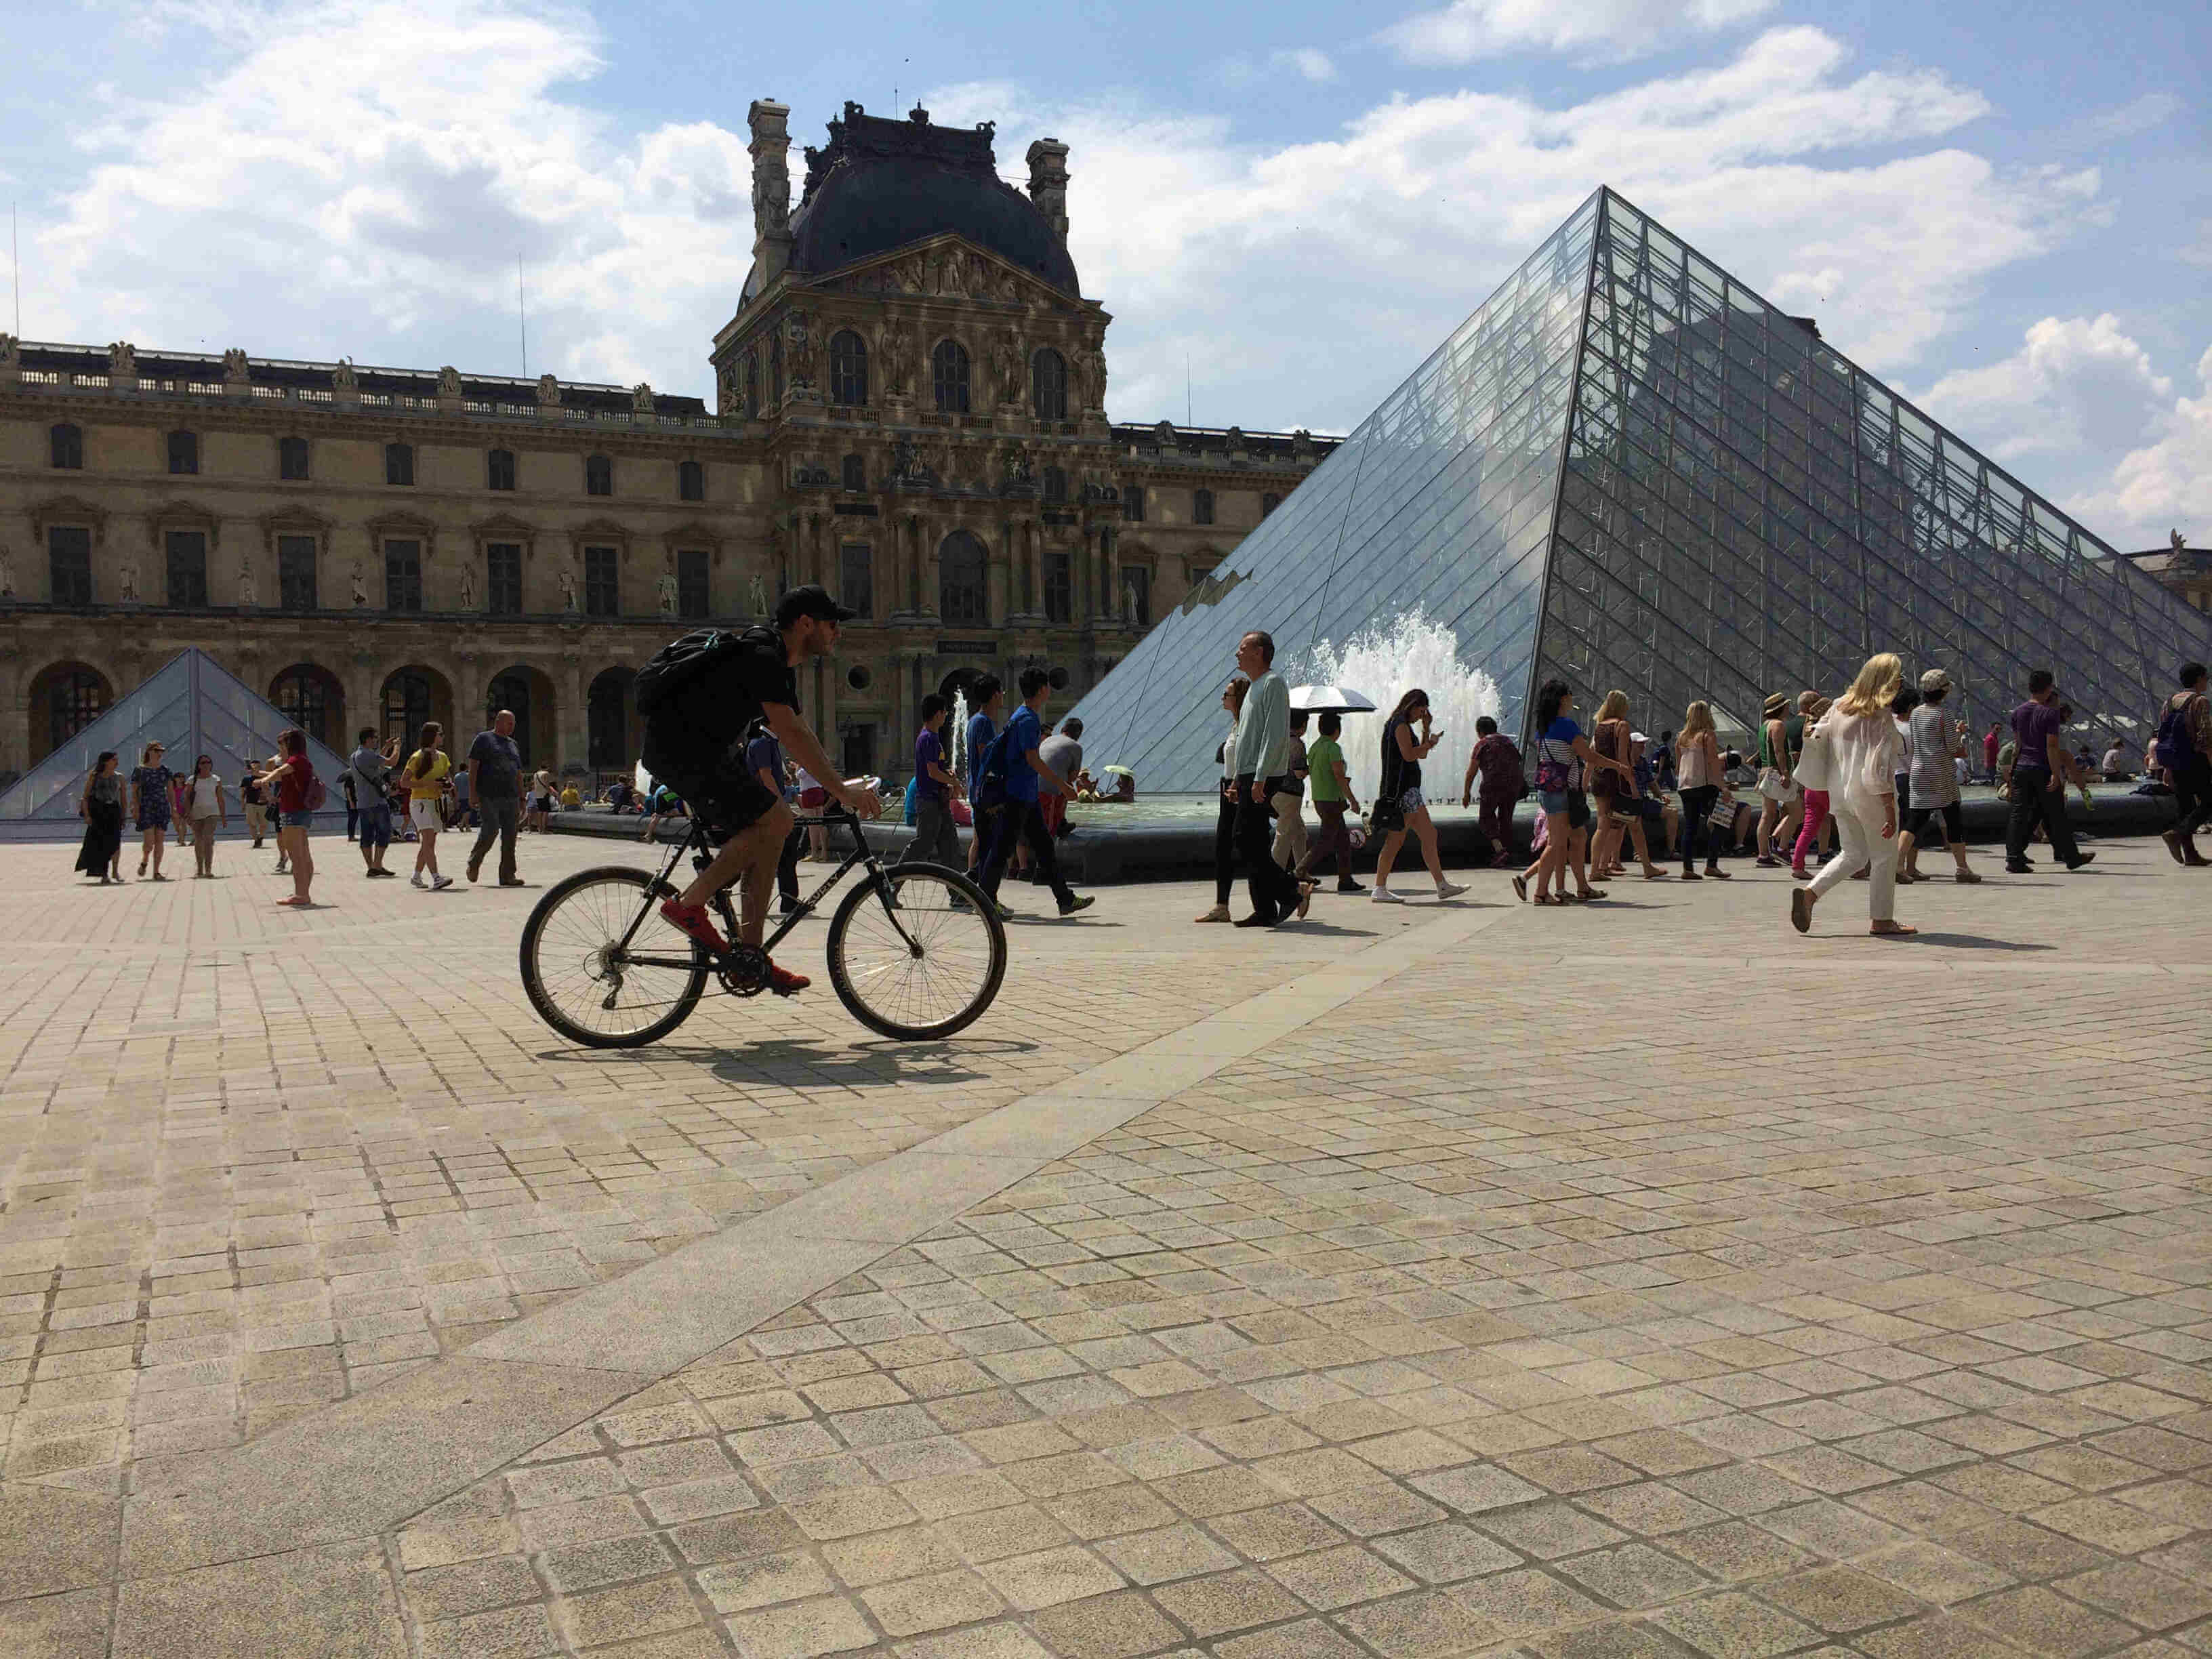 Right side view of a cyclist wearing a backpack, riding a bike across the courtyard in front of the Louvre museum